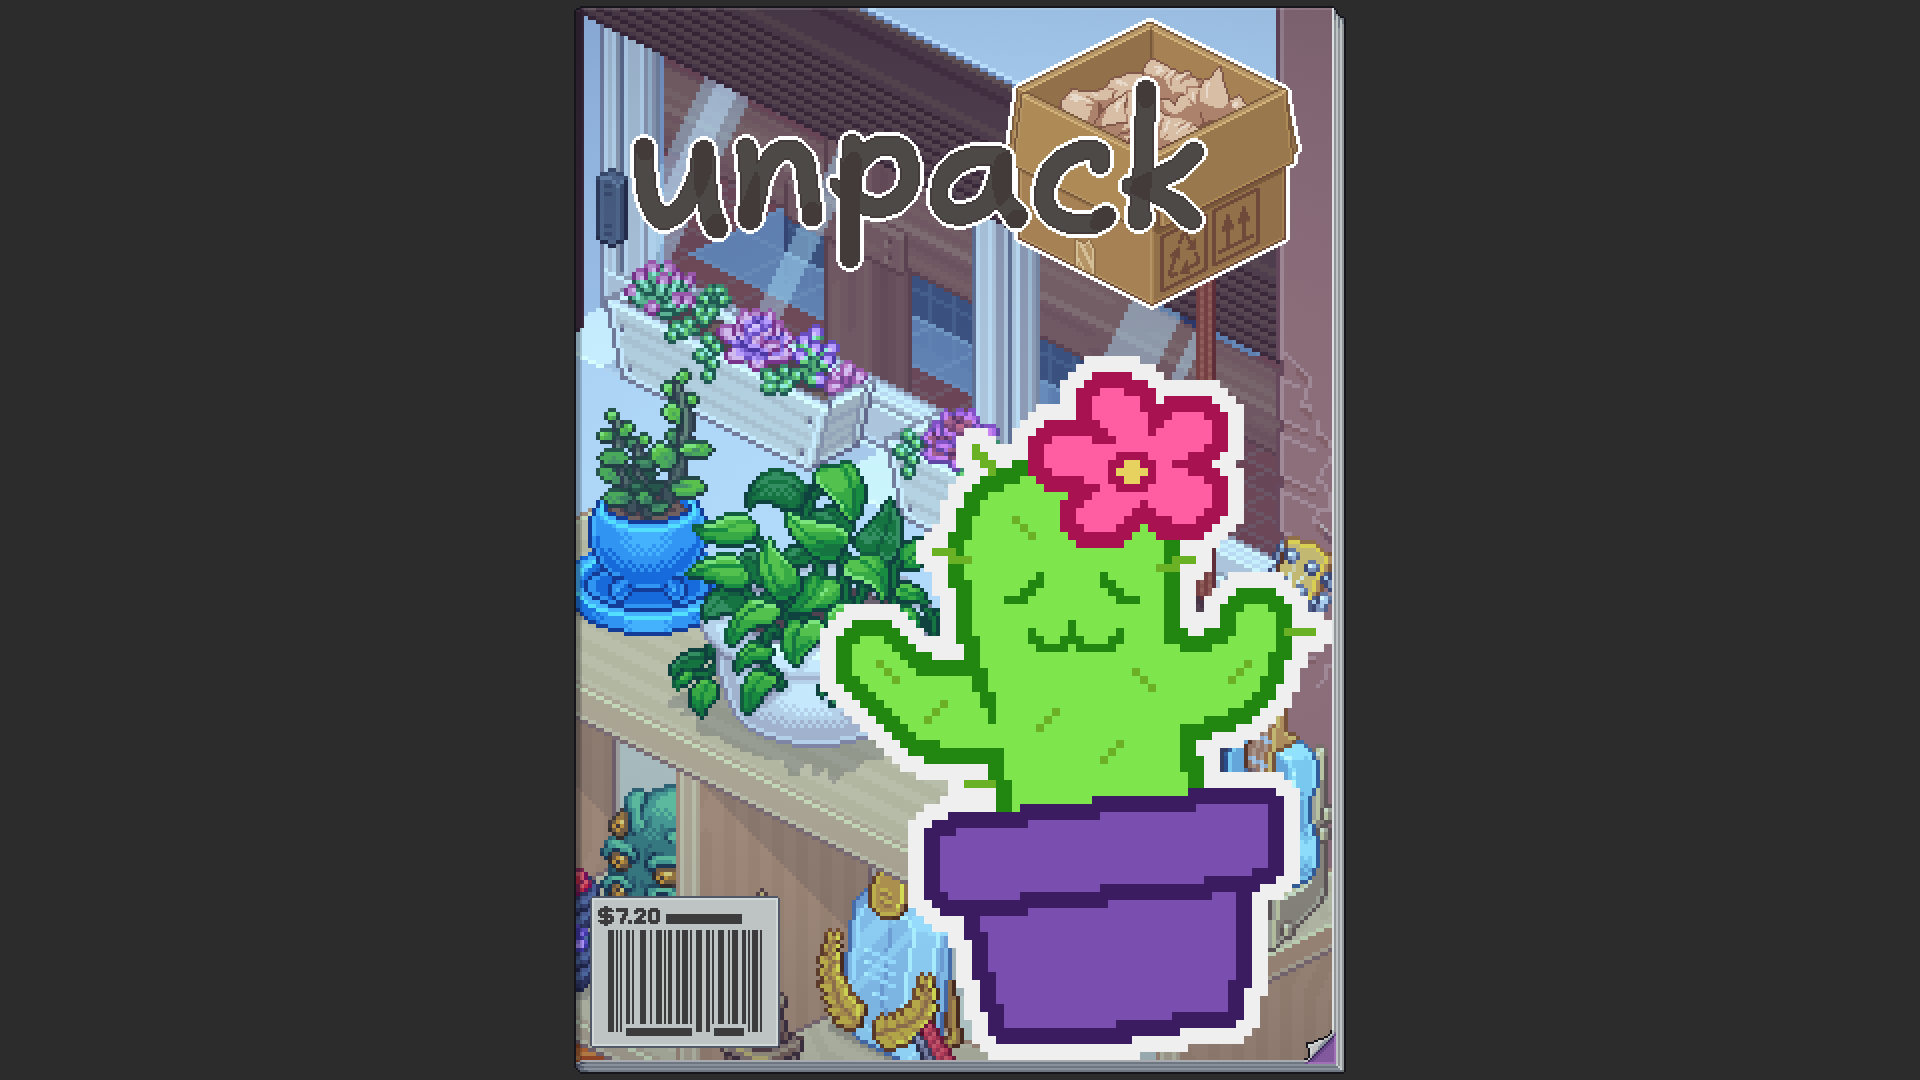 Icon for Green thumb